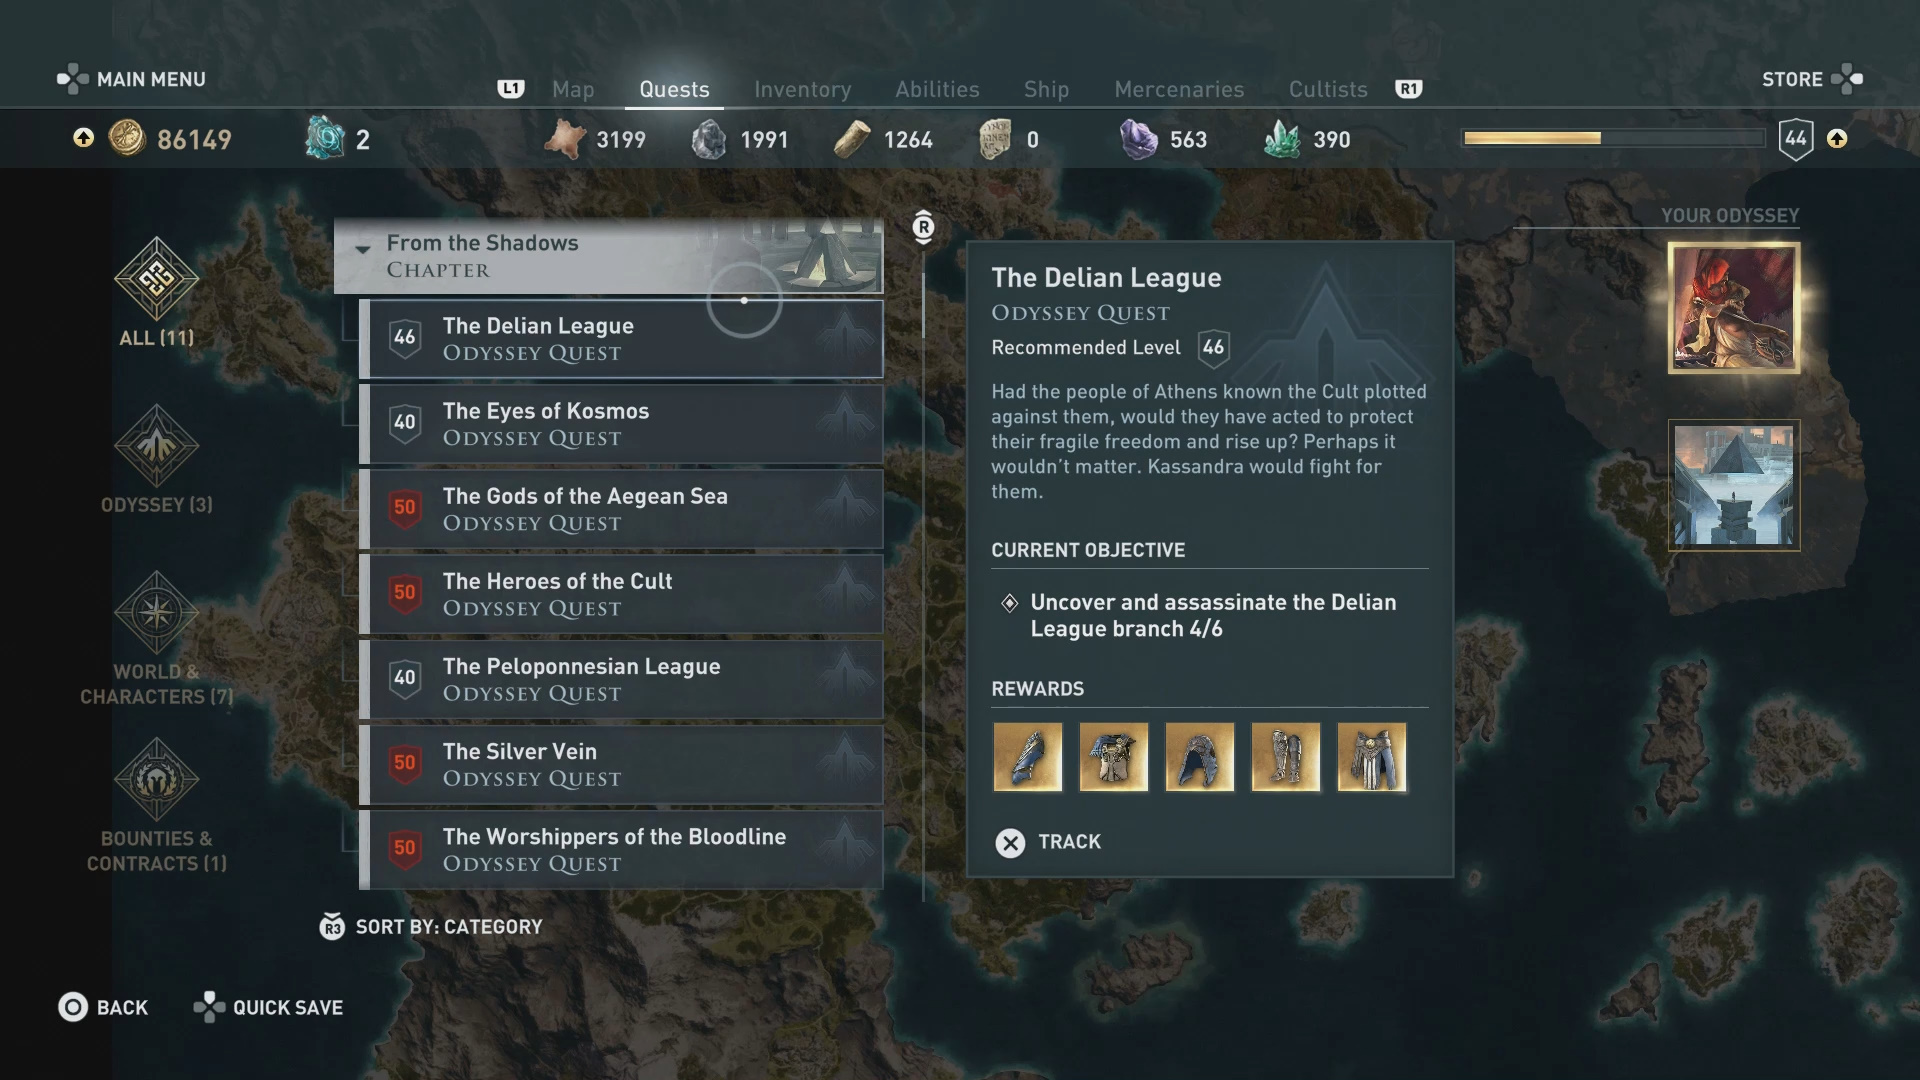 Quests in Assassin's Creed Odyssey